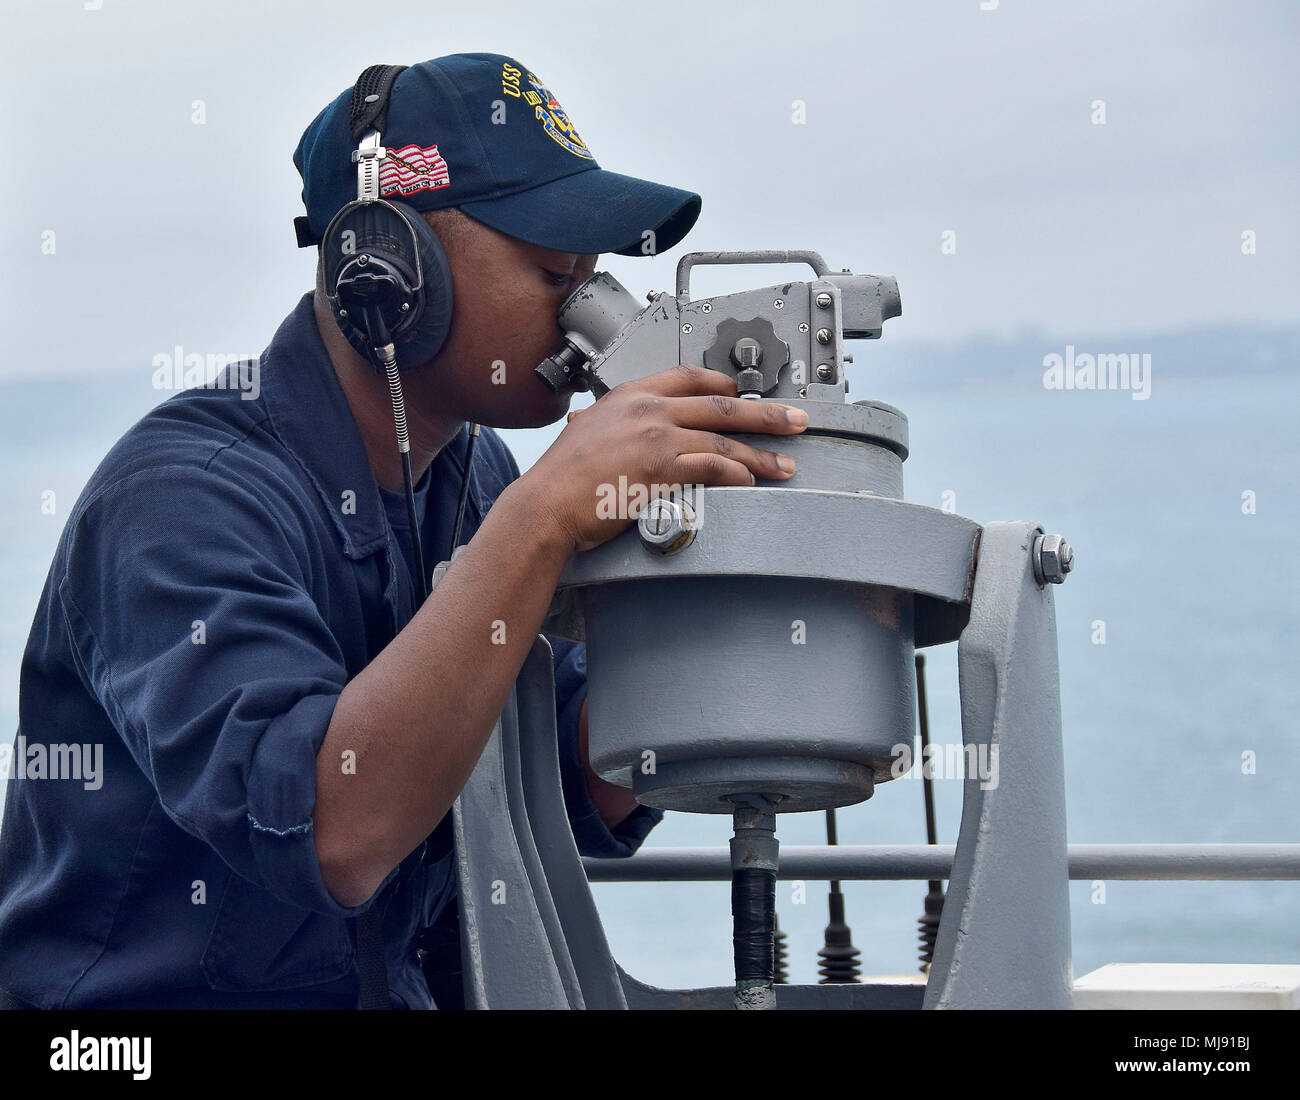 180421-N-RI884-0276 PHILIPPINE SEA (April 21, 2018) Operations Specialist Seaman J'Corey Jackson uses an Alidade, a scientific instrument for measuring angles, aboard the amphibious assault ship USS Wasp (LHD 1) as the ship prepares to moor in Okinawa to disembark the 31st Marine Expeditionary Unit. Wasp, part of the Wasp Expeditionary Strike Group, has been operating with the MEU for nearly two months as part of a routine patrol in the Indo-Pacific. (U.S. Navy photo by Mass Communication Specialist 1st Class Daniel Barker/Released) Stock Photo